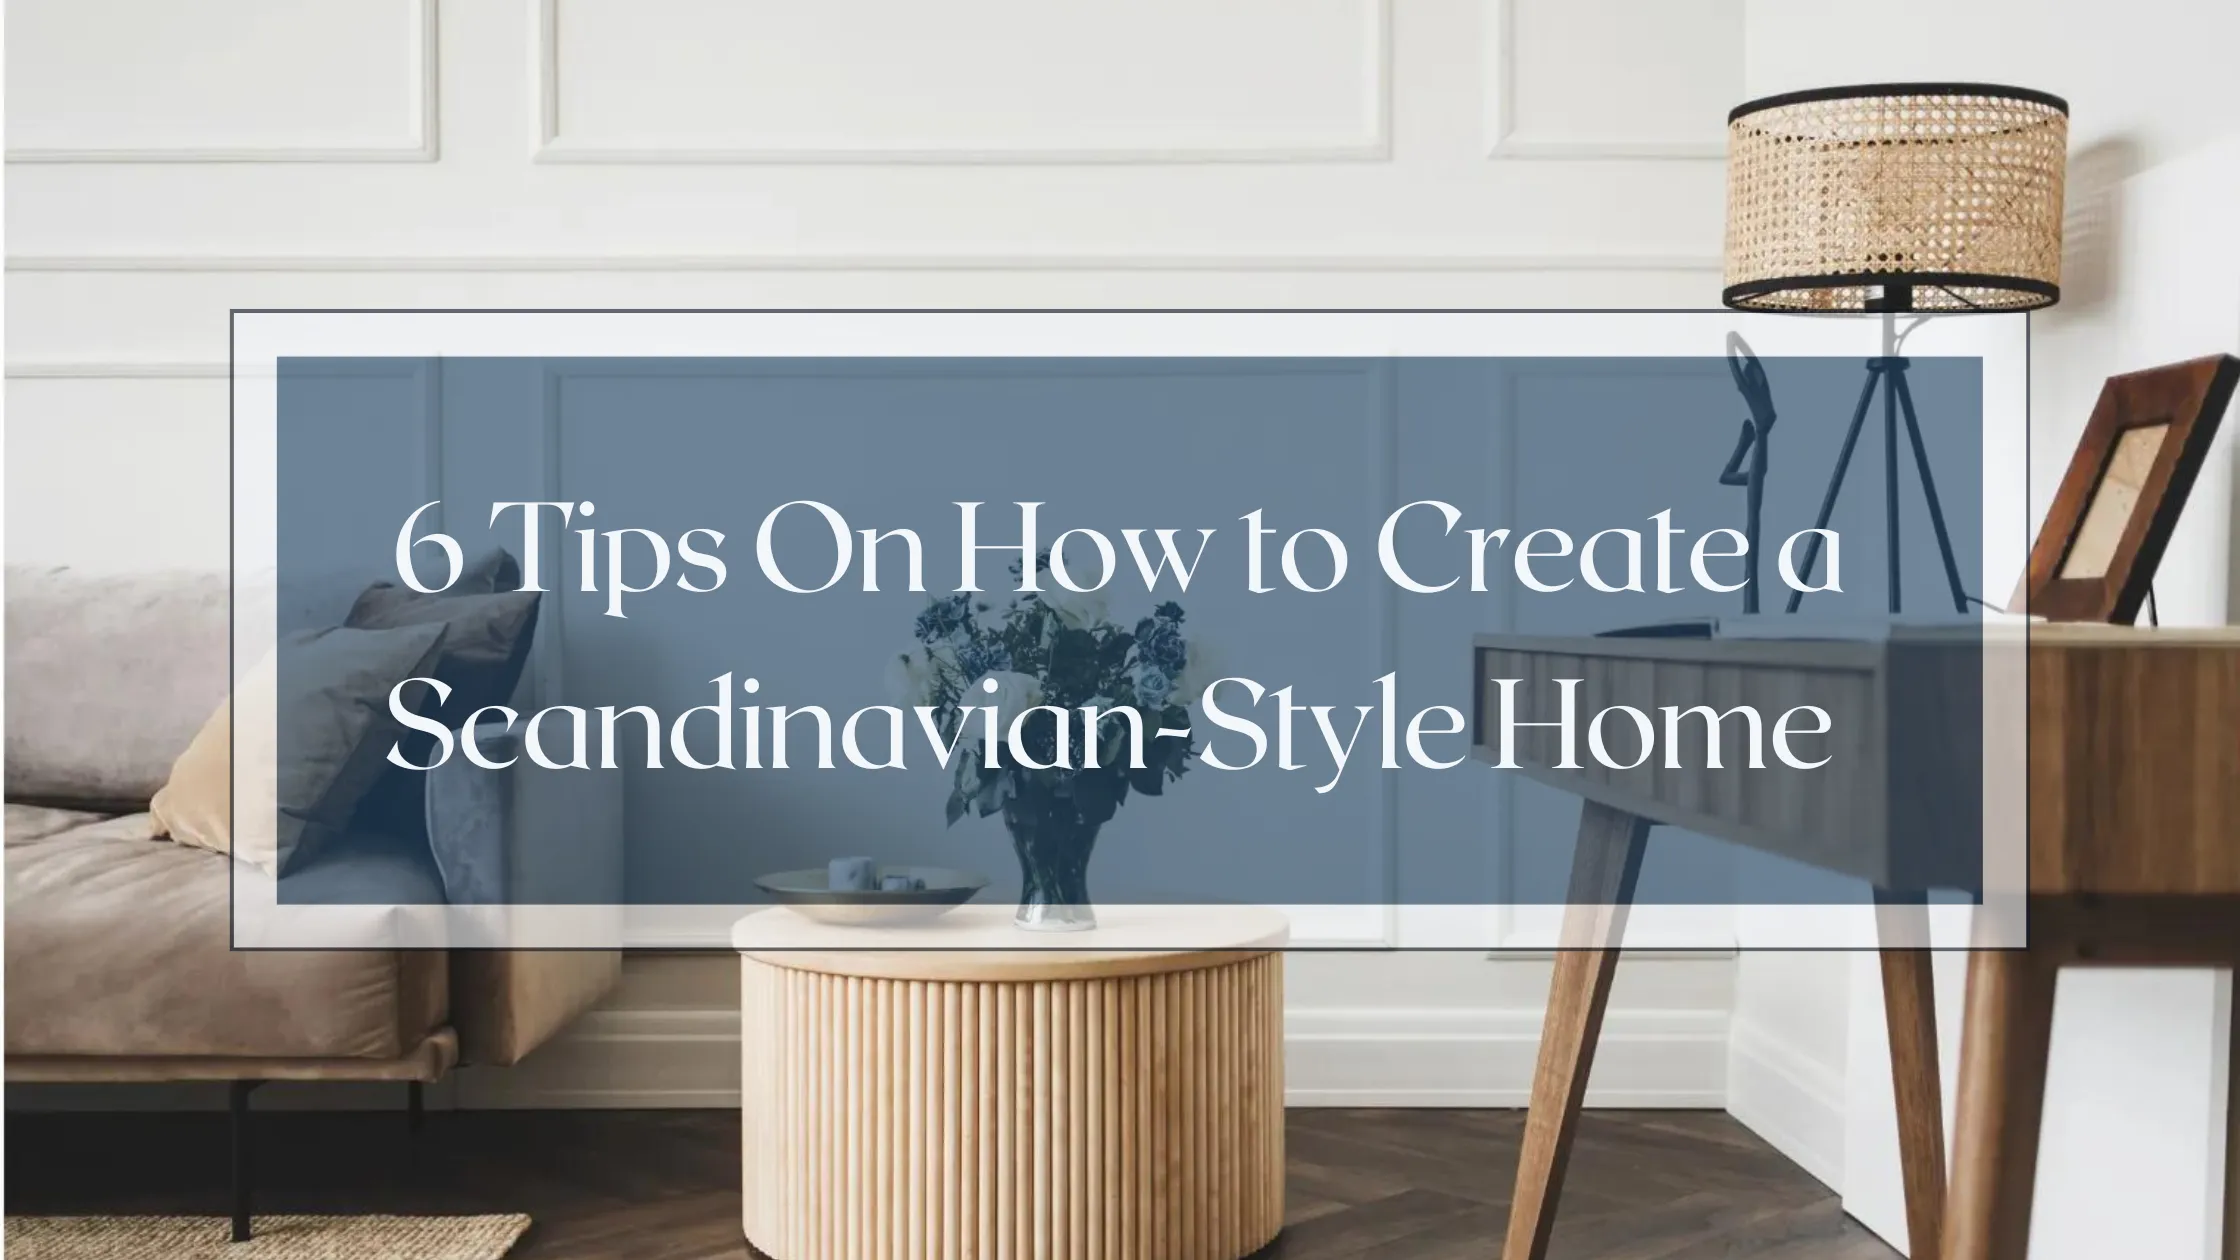 6 Tips On How to Design a Scandinavian-Style Home